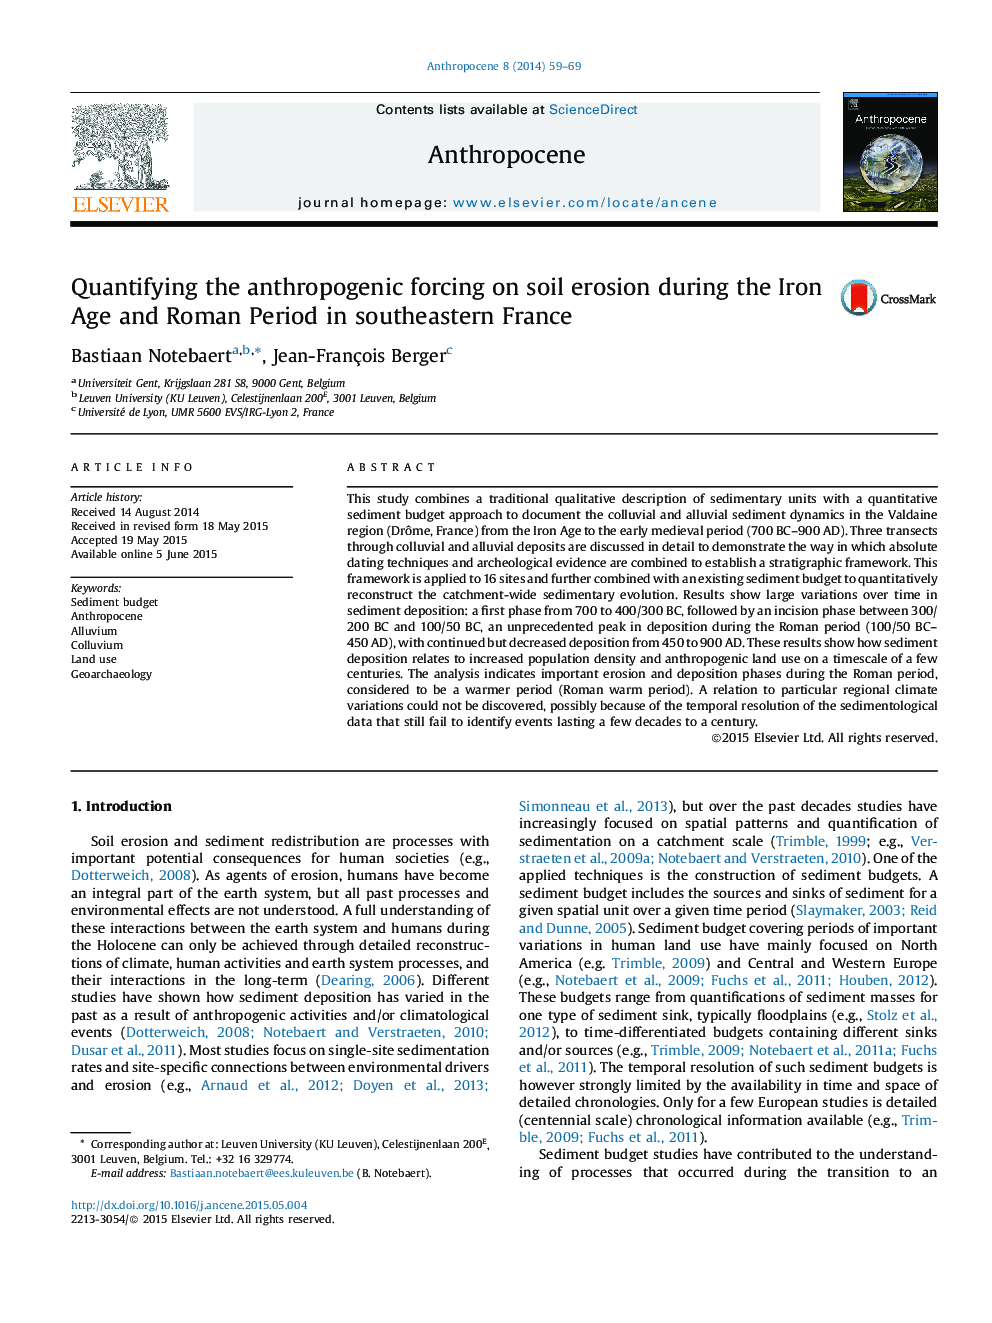 Quantifying the anthropogenic forcing on soil erosion during the Iron Age and Roman Period in southeastern France